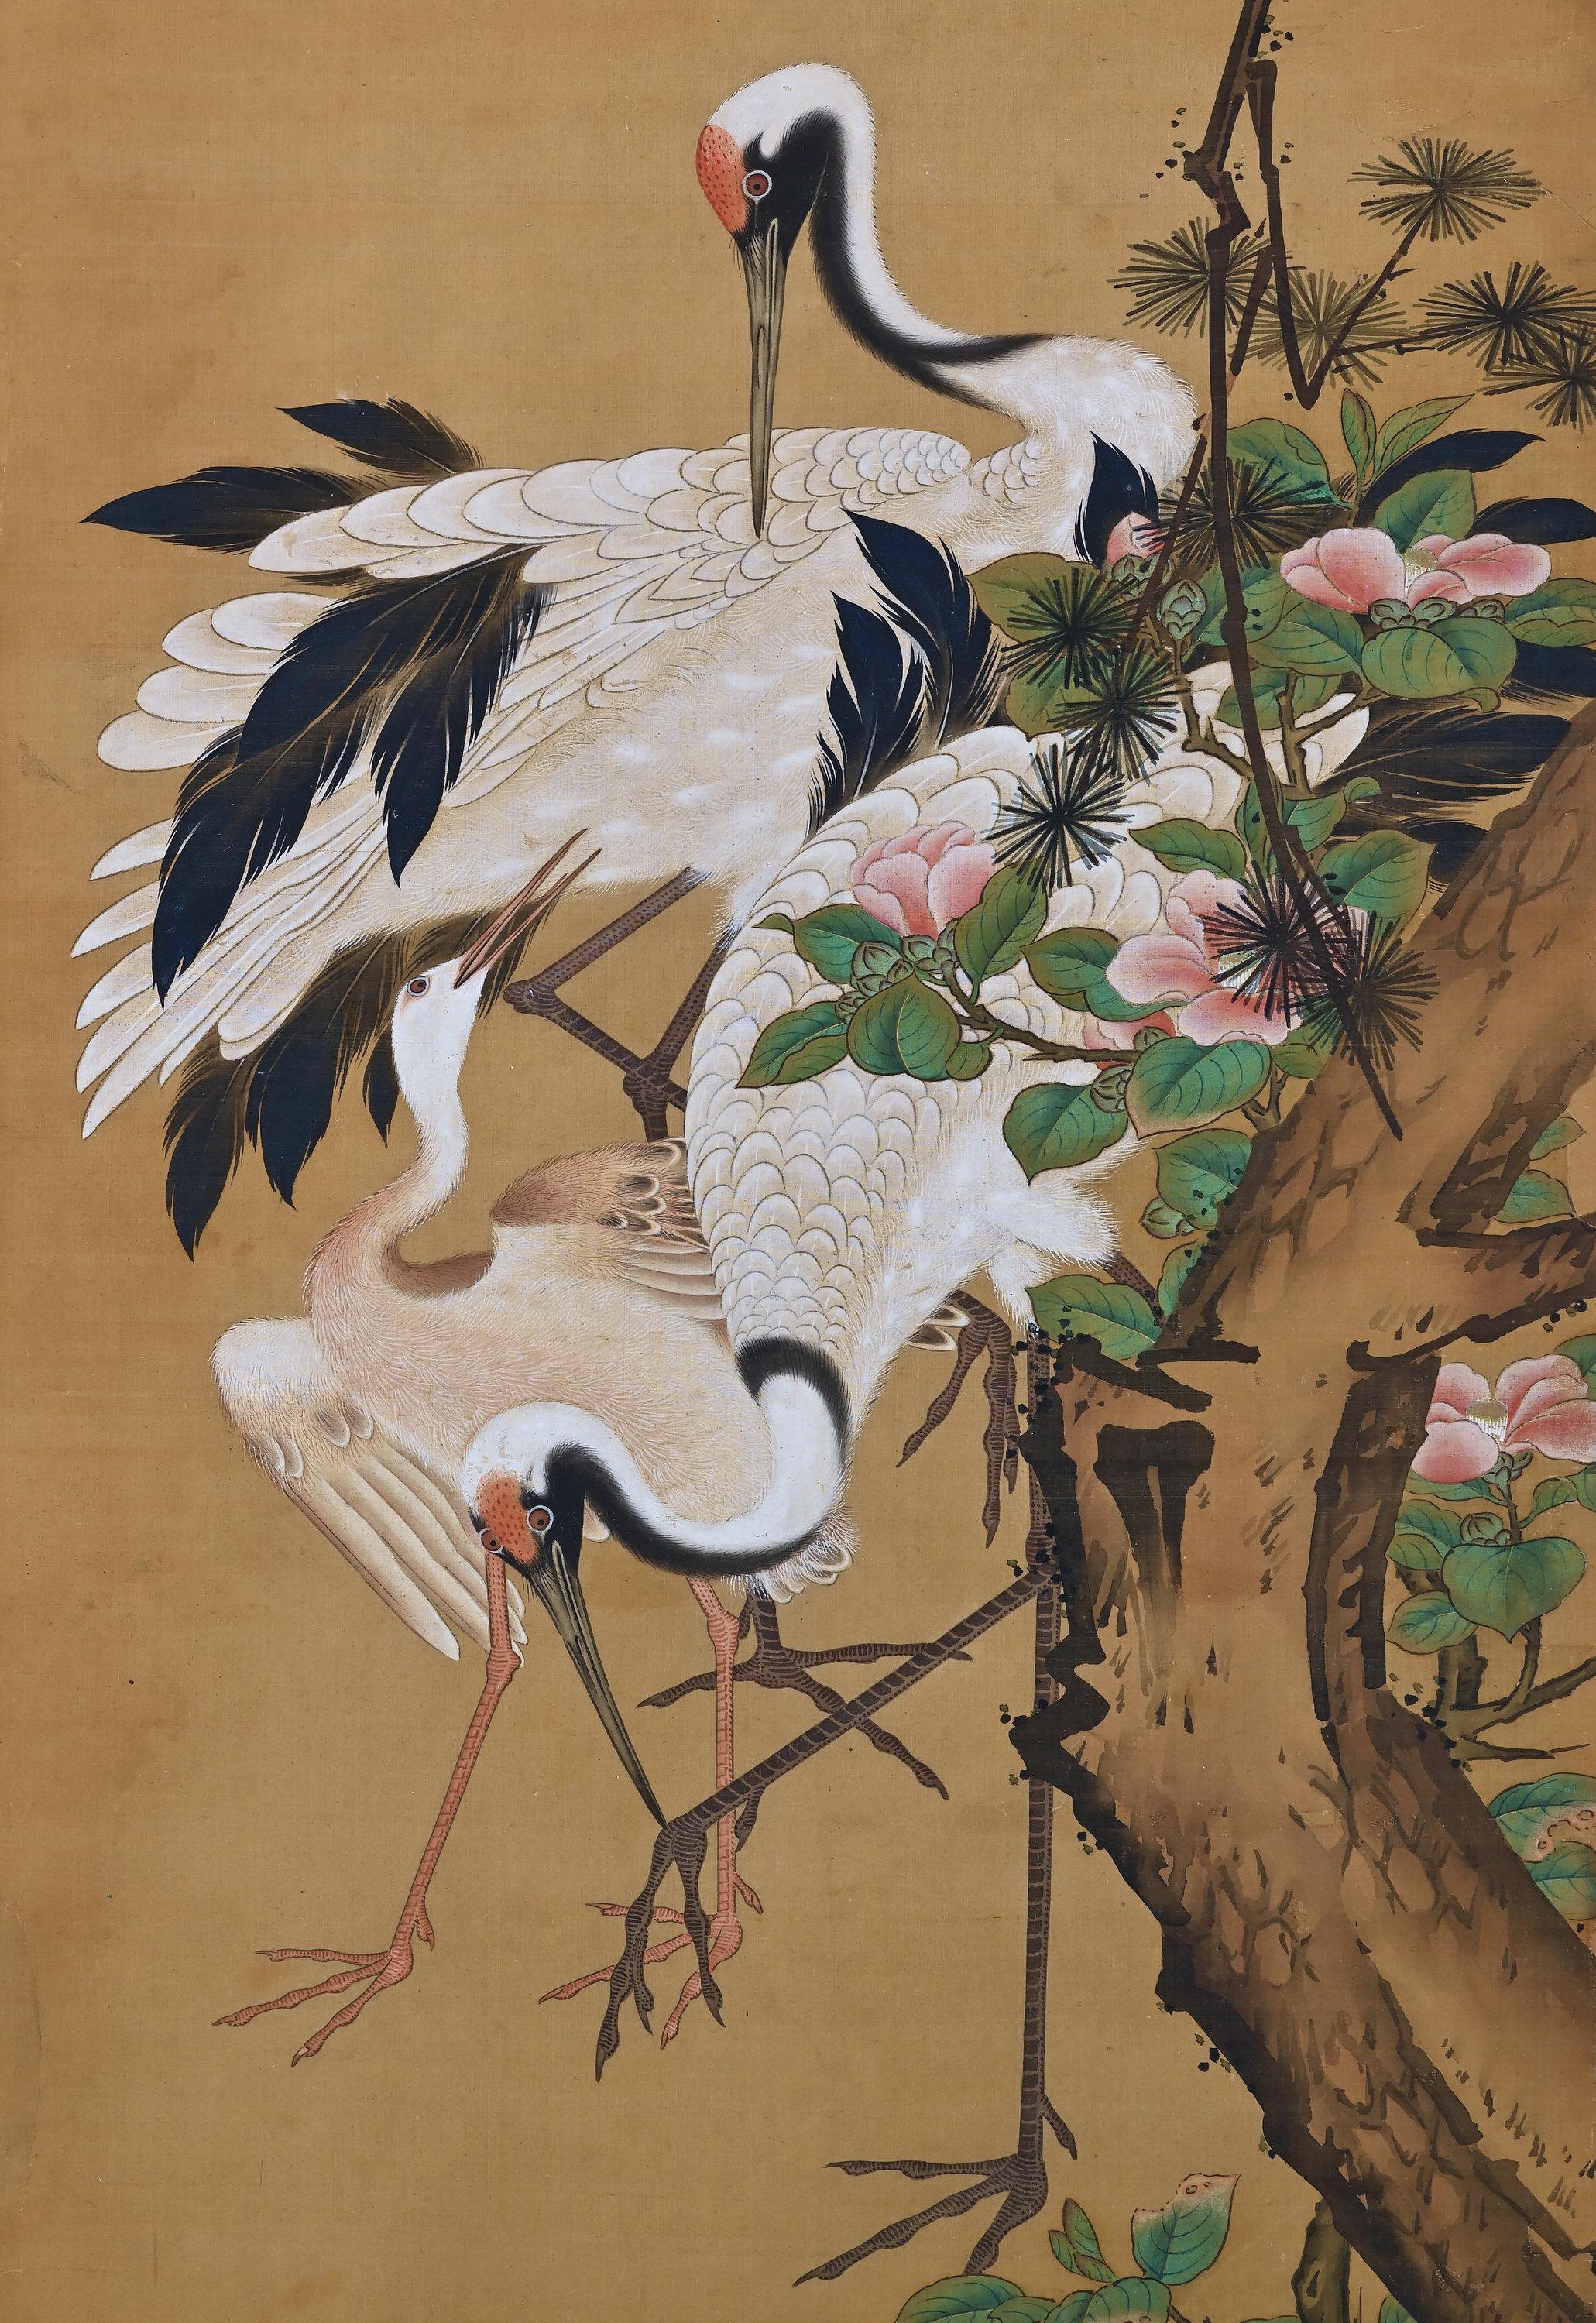 Birds & Flowers of the Seasons

Pheasants & Plum in Snow

Unframed painting. Ink, pigment and gofun on silk

Kano Chikanobu 1819-1888

Signature: Chikanobu

Seal: Shateki

Offered here is an unframed ‘kacho-e’ painting by the 19th